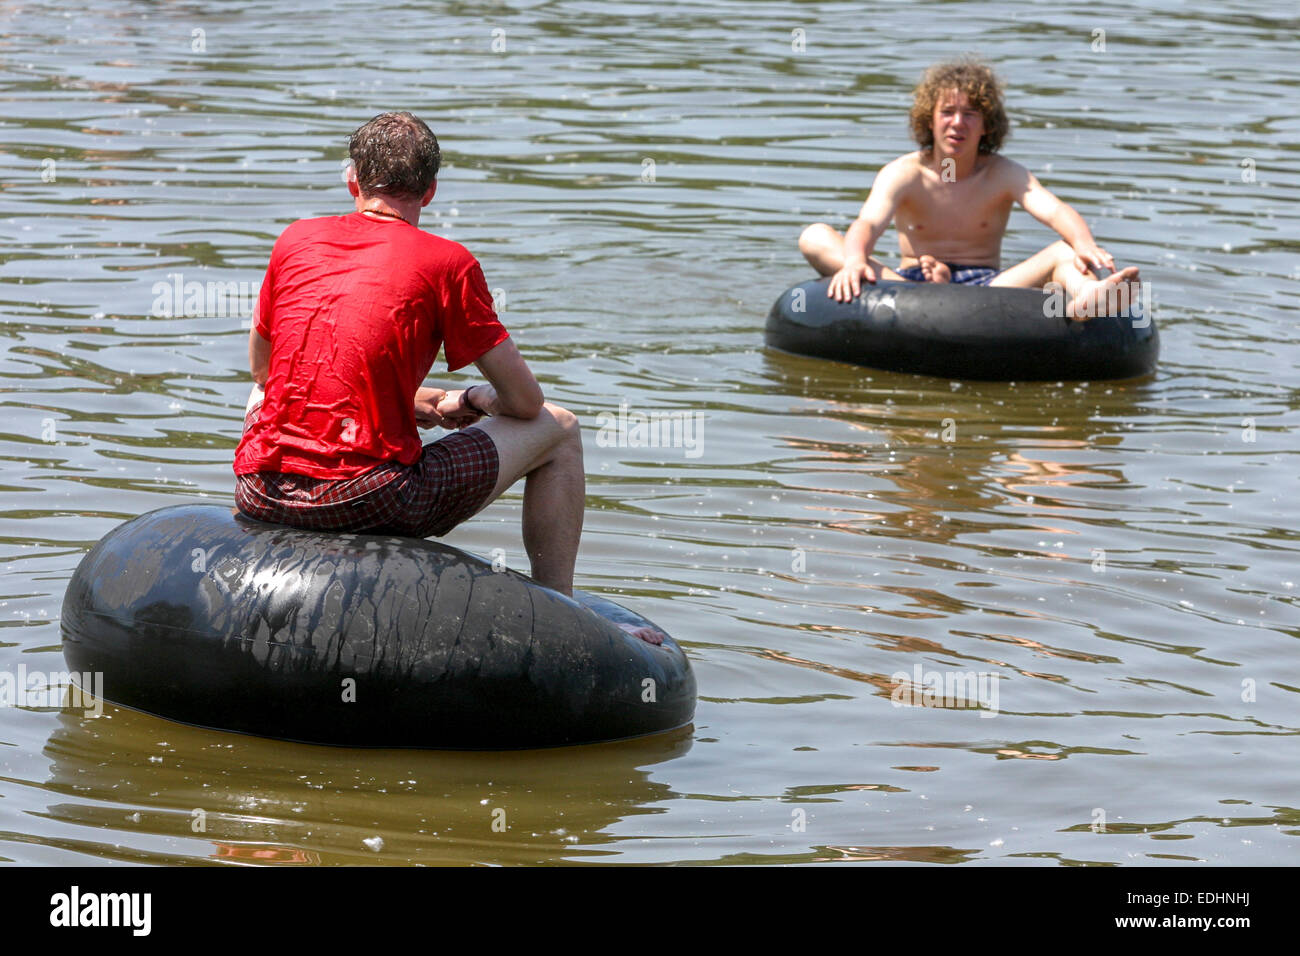 Two men on inflated rubber soul on the water Stock Photo